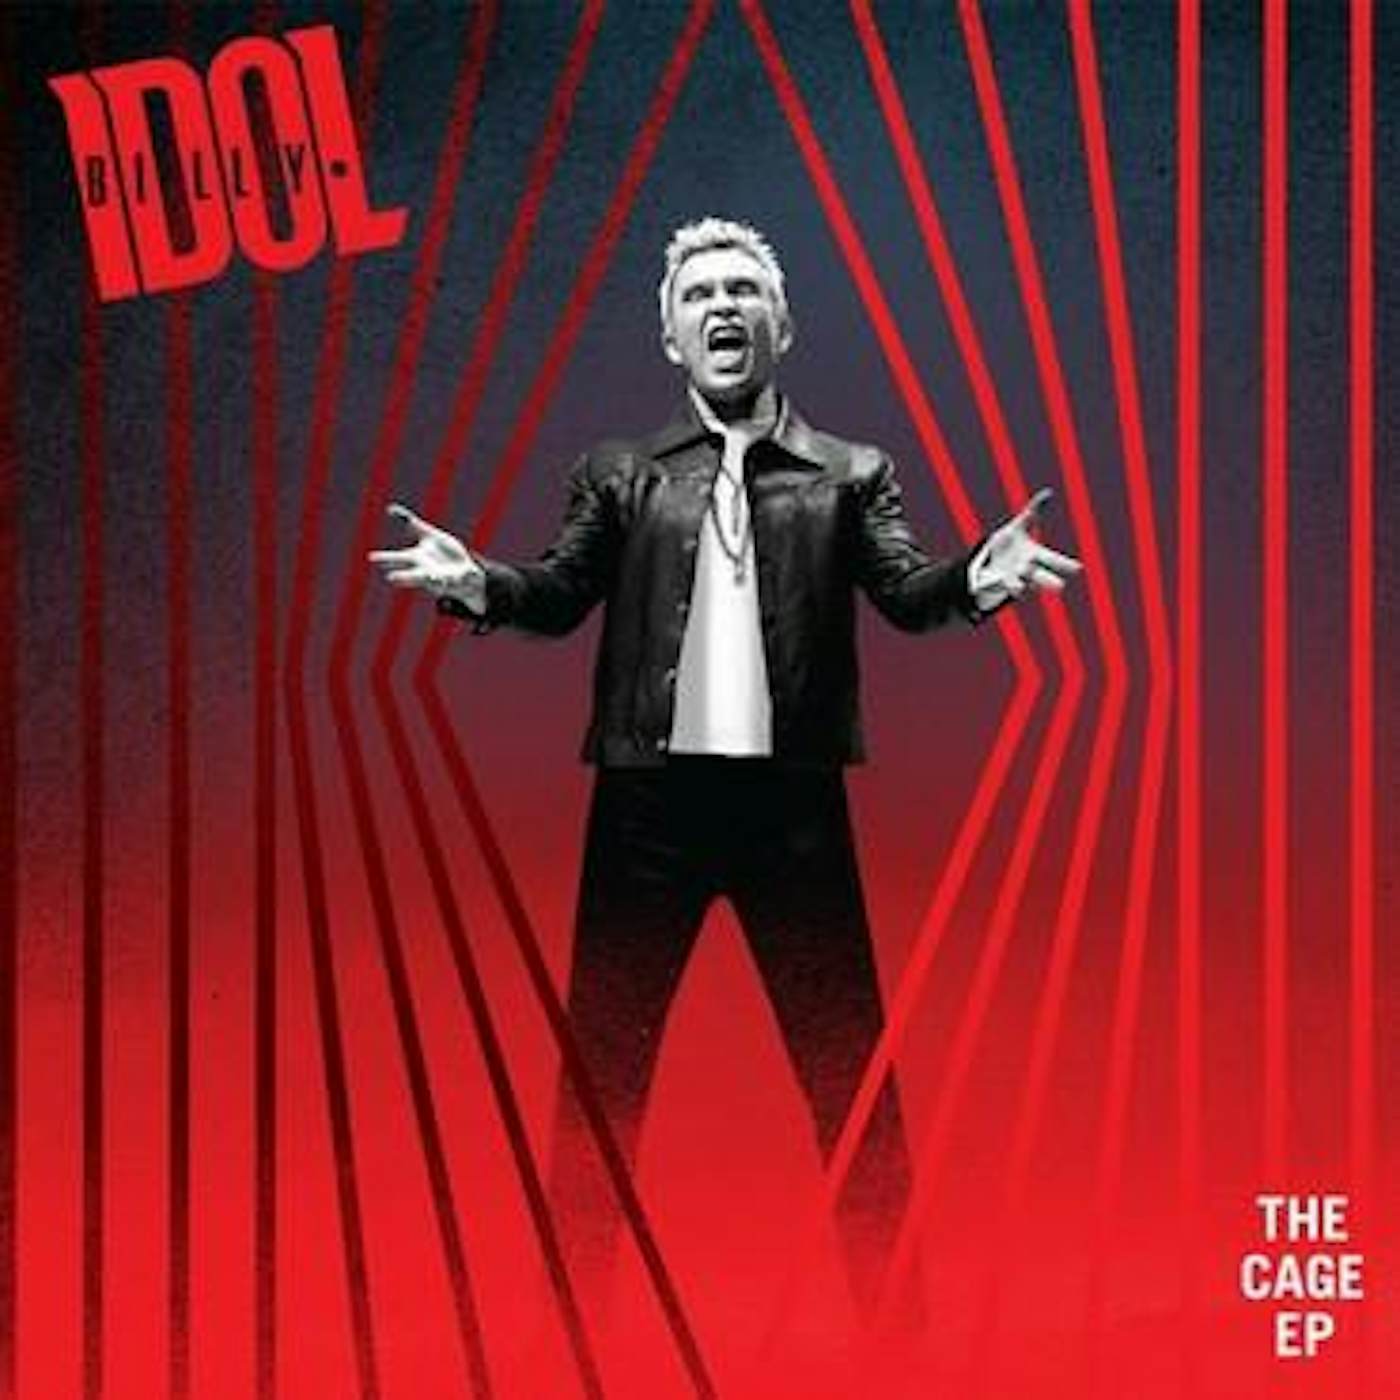 Billy Idol CAGE EP CD